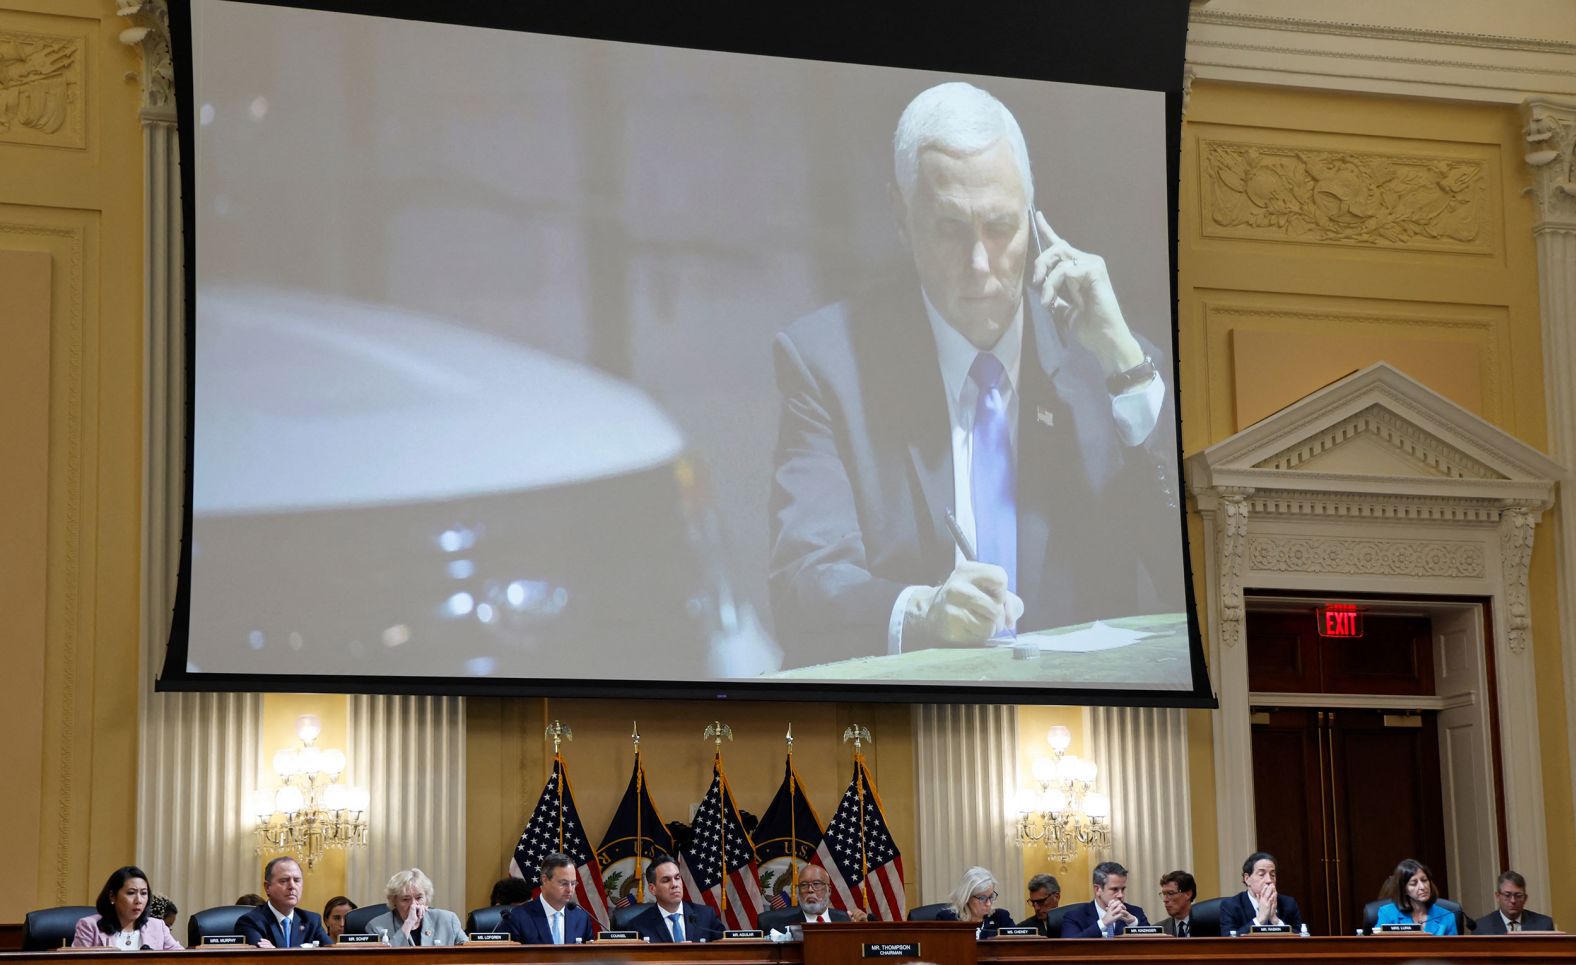 A photo of then-Vice President Mike Pence is displayed over the committee during a hearing on June 16. In the photo, Pence is speaking on the phone from a secure location during the January 6 riot. <a href="index.php?page=&url=https%3A%2F%2Fwww.cnn.com%2Fpolitics%2Flive-news%2Fjanuary-6-hearings-june-16%2Fh_95accf46d29724f6cac148ef54cd92e0" target="_blank">Pence did not want to be seen as fleeing the Capitol,</a> according to testimony provided to the committee by advisers and aides who were working for him at the time.